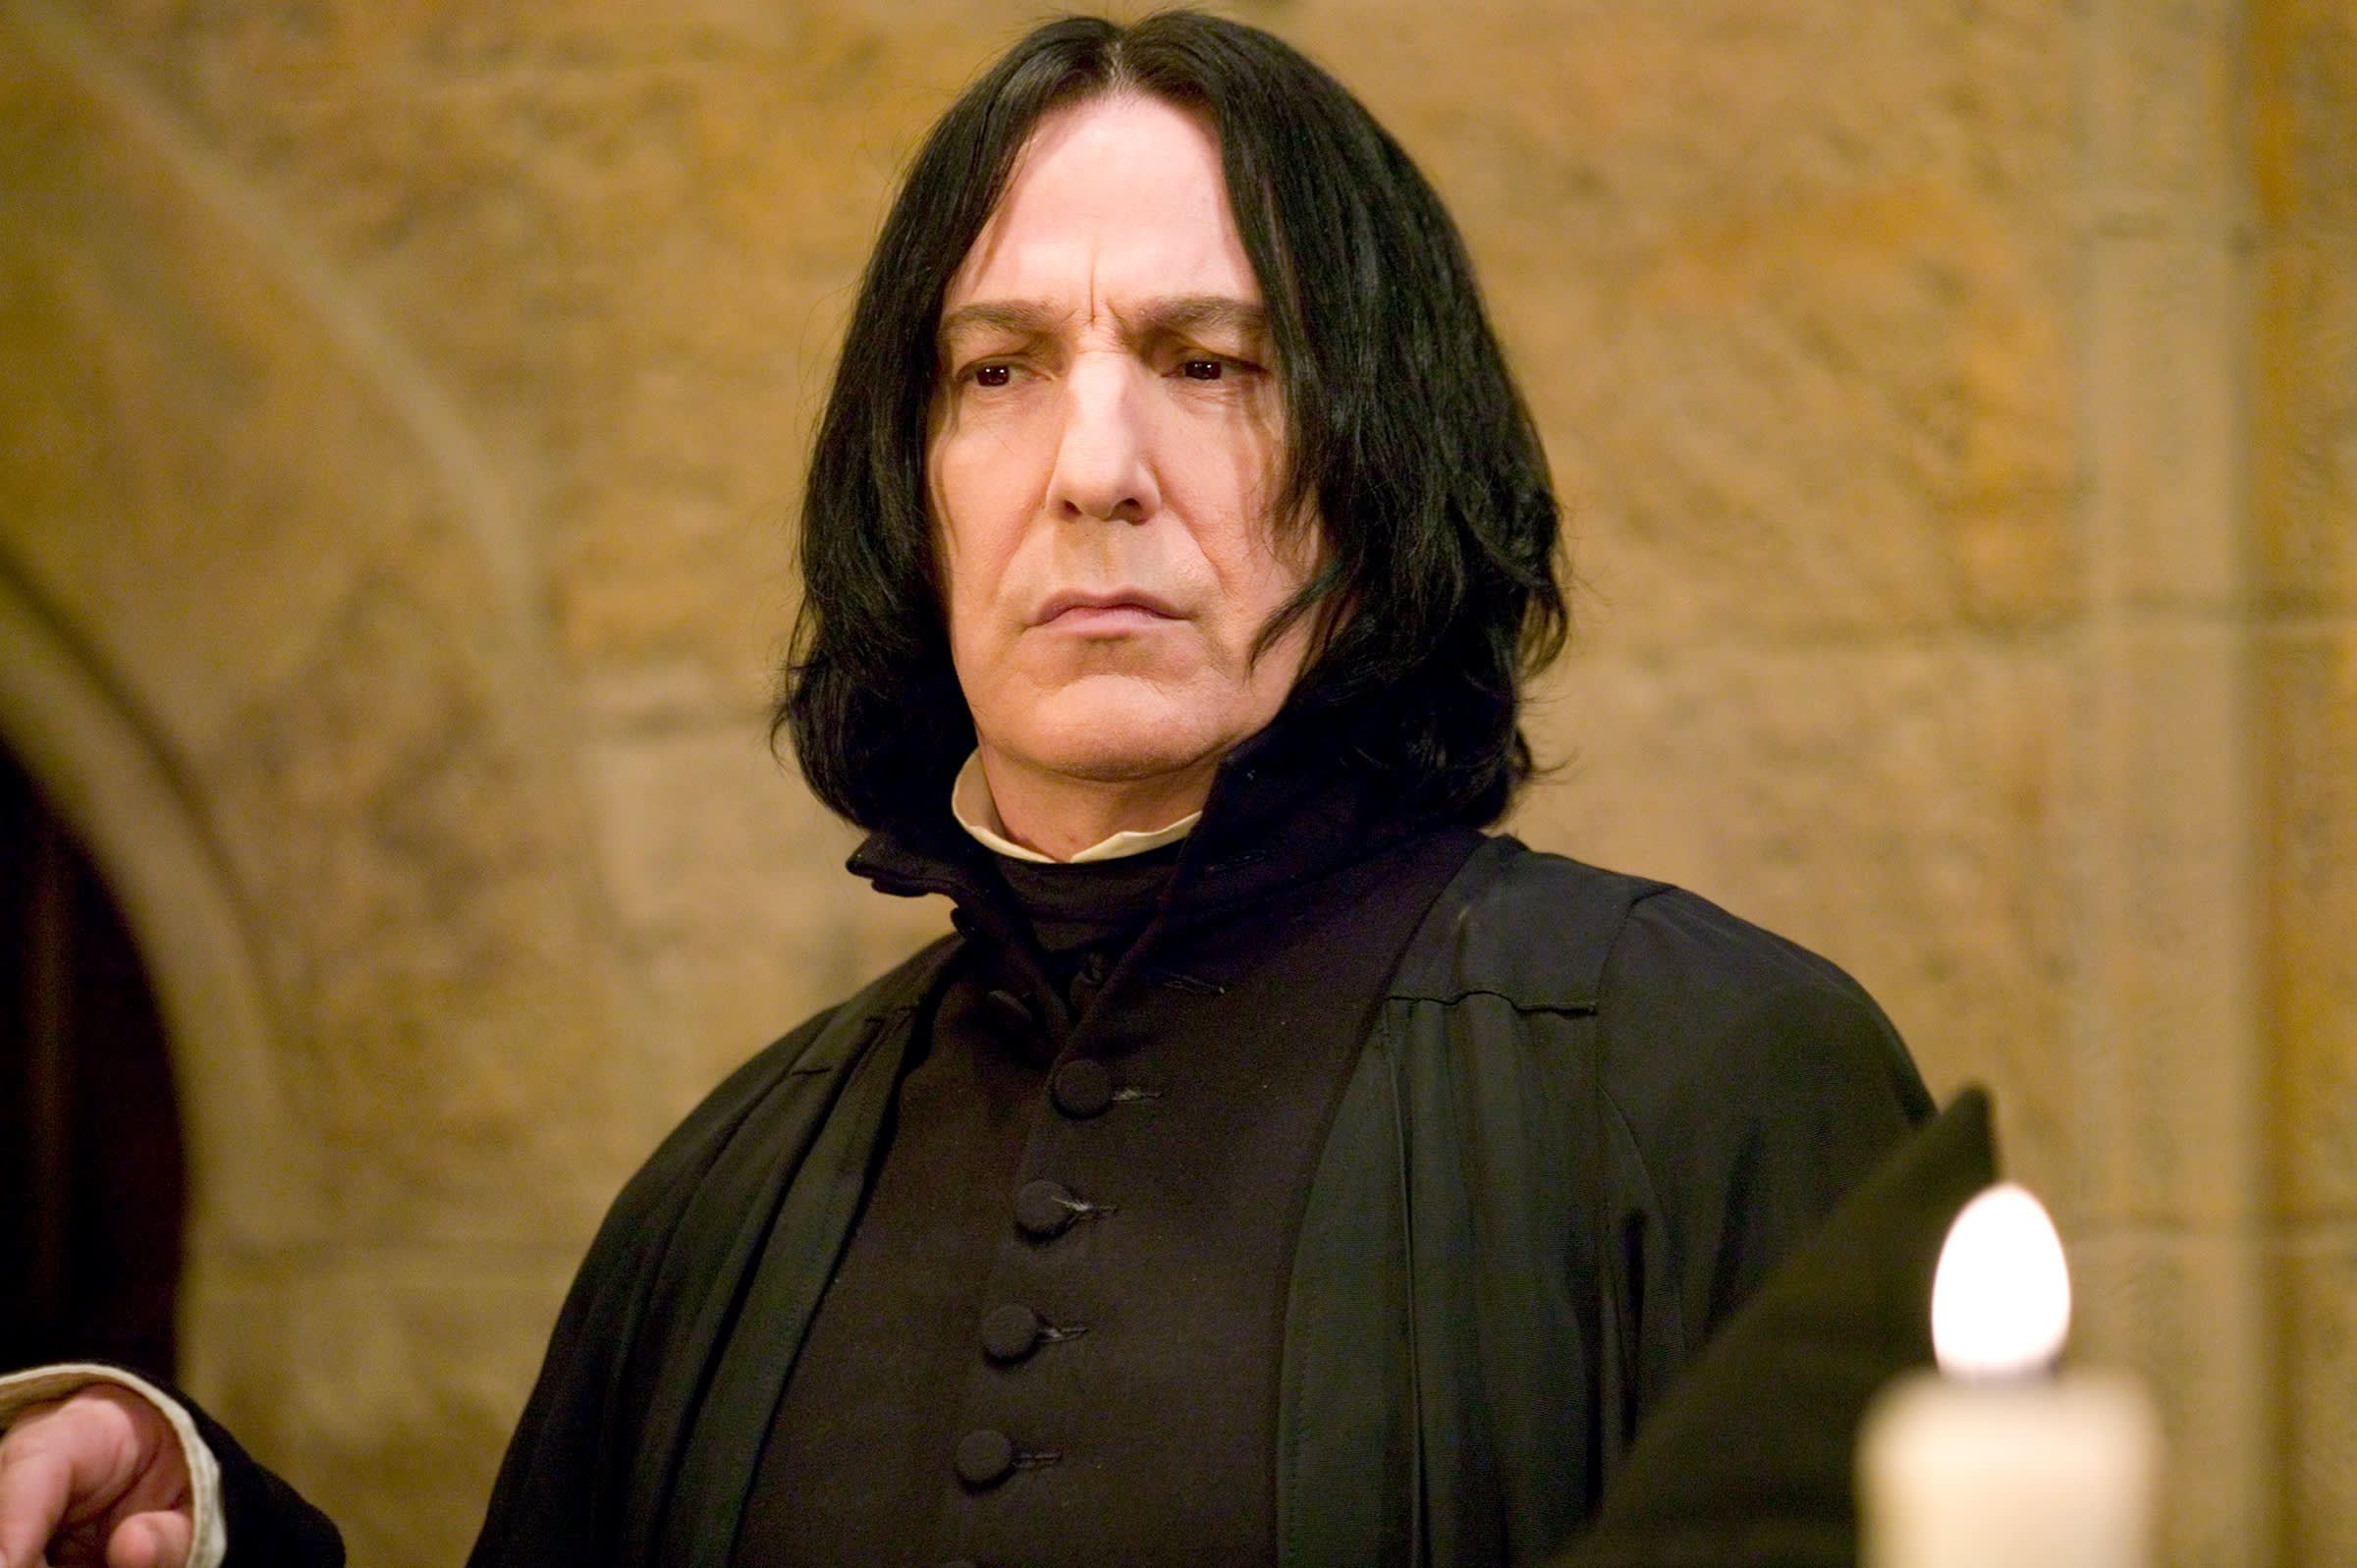 Alan-Rickman-As-Severus-Snape-In-The-Goblet-Of-Fire